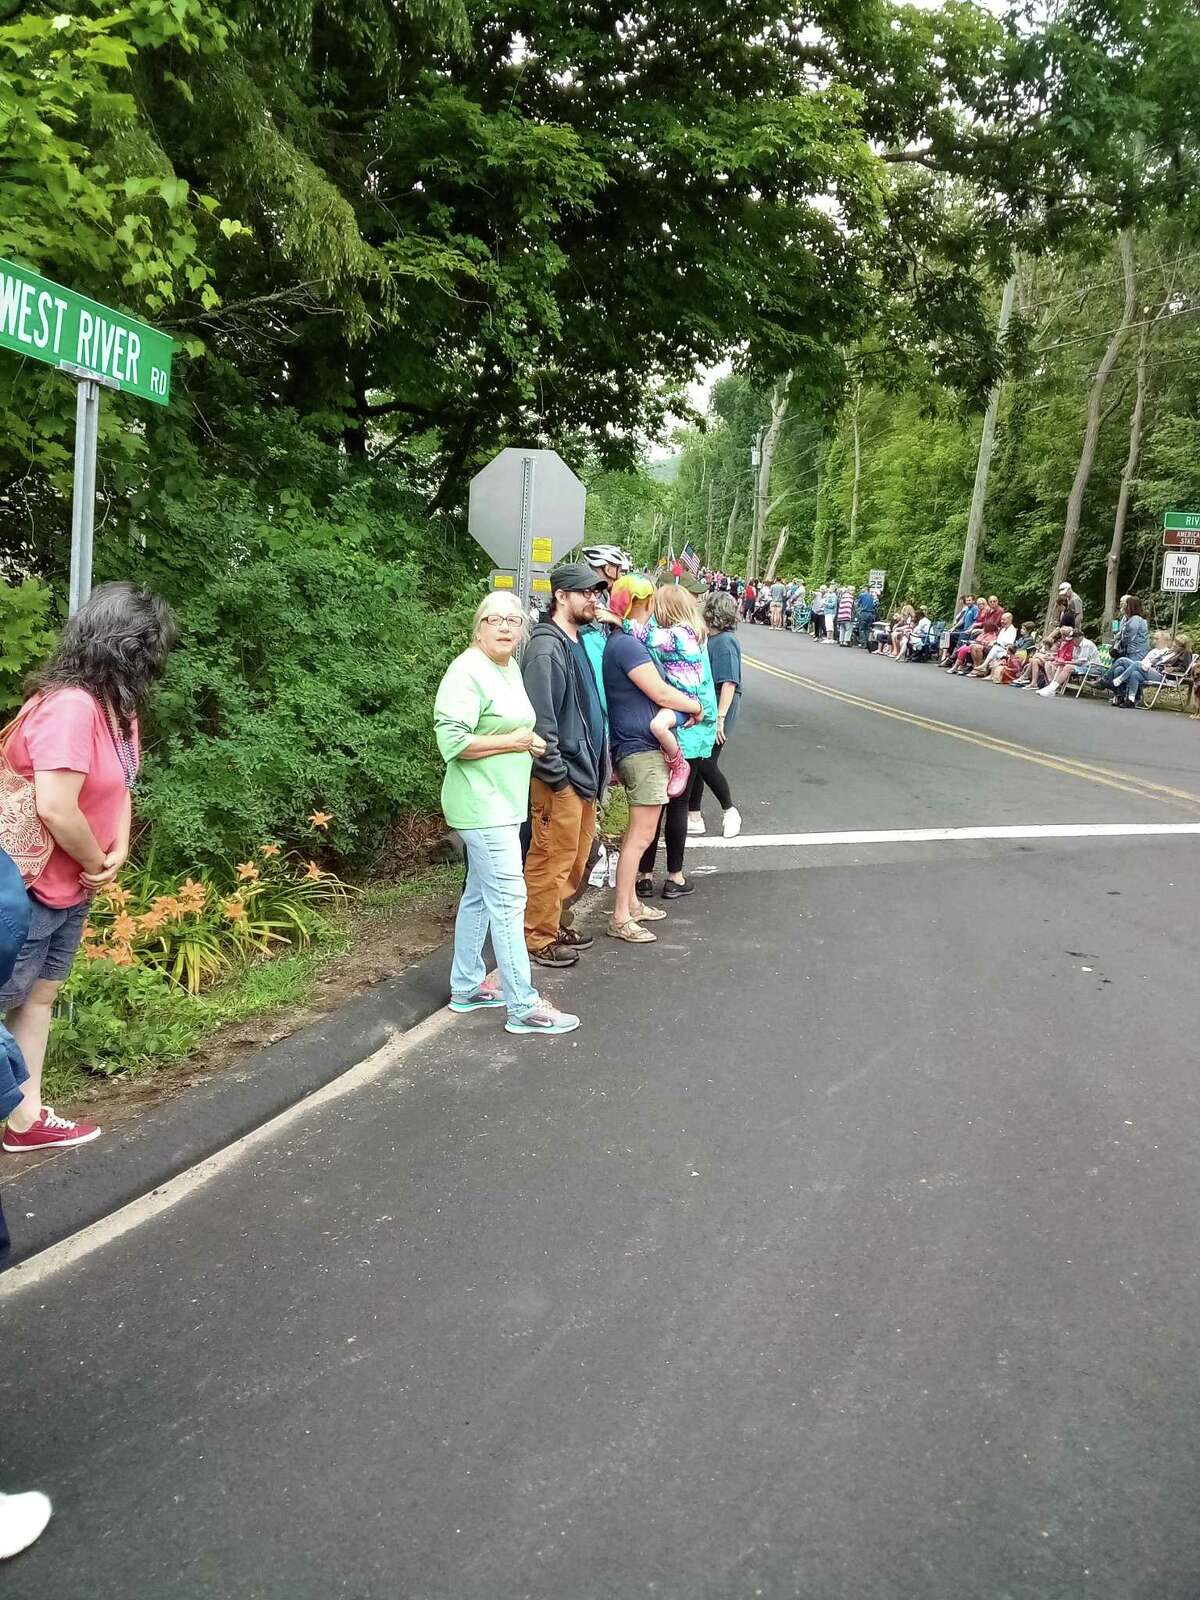 Barkhamsted residents watch the July 5, 2021 parade from the corner of West River Road in the Pleasant Valley section of town. Filmmakers are using a portion of the road for a movie, Oct. 19-20, 2021.